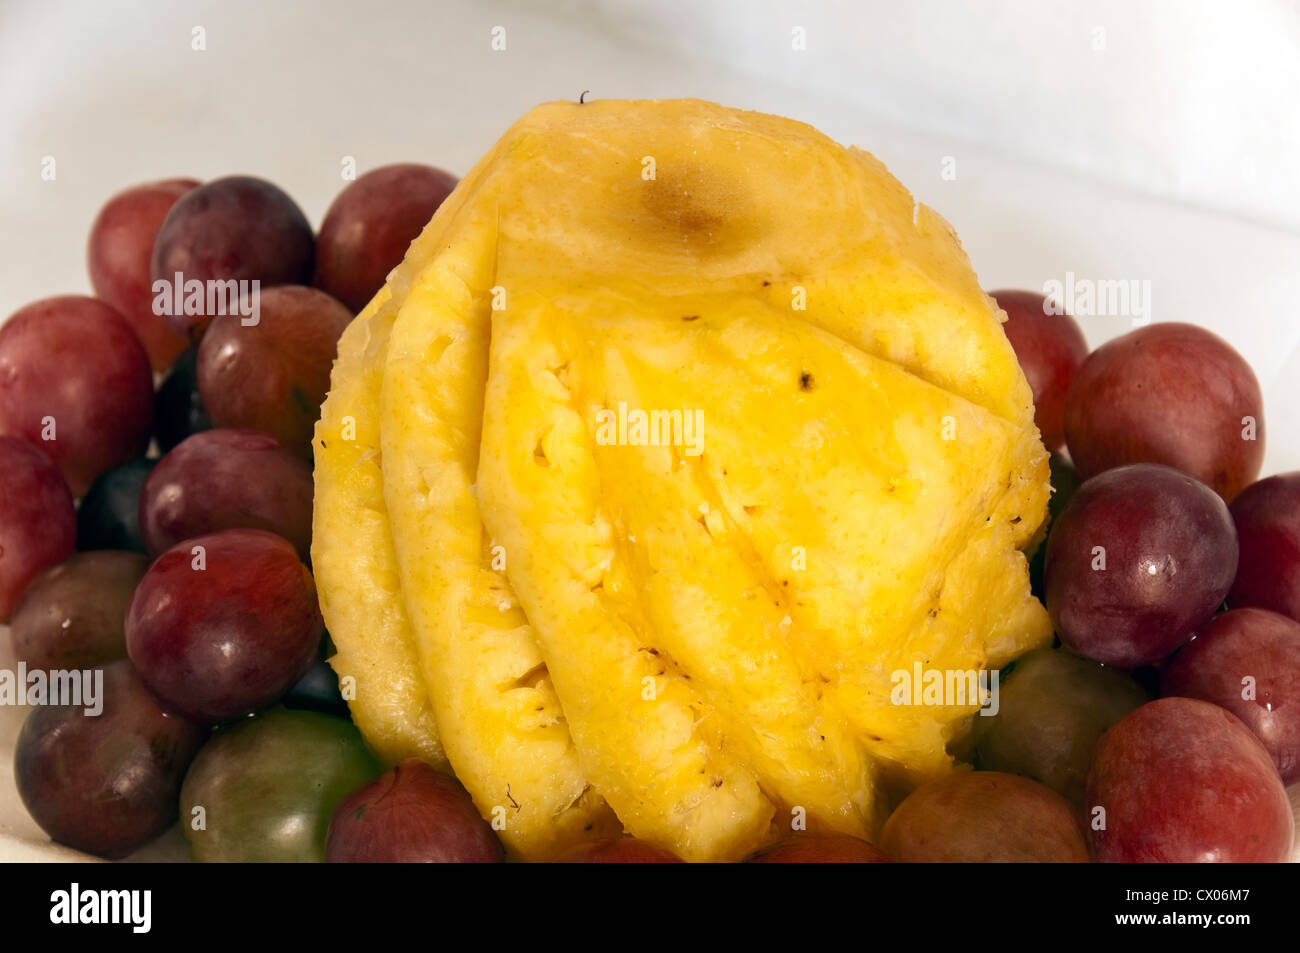 pineapple and grapes Stock Photo